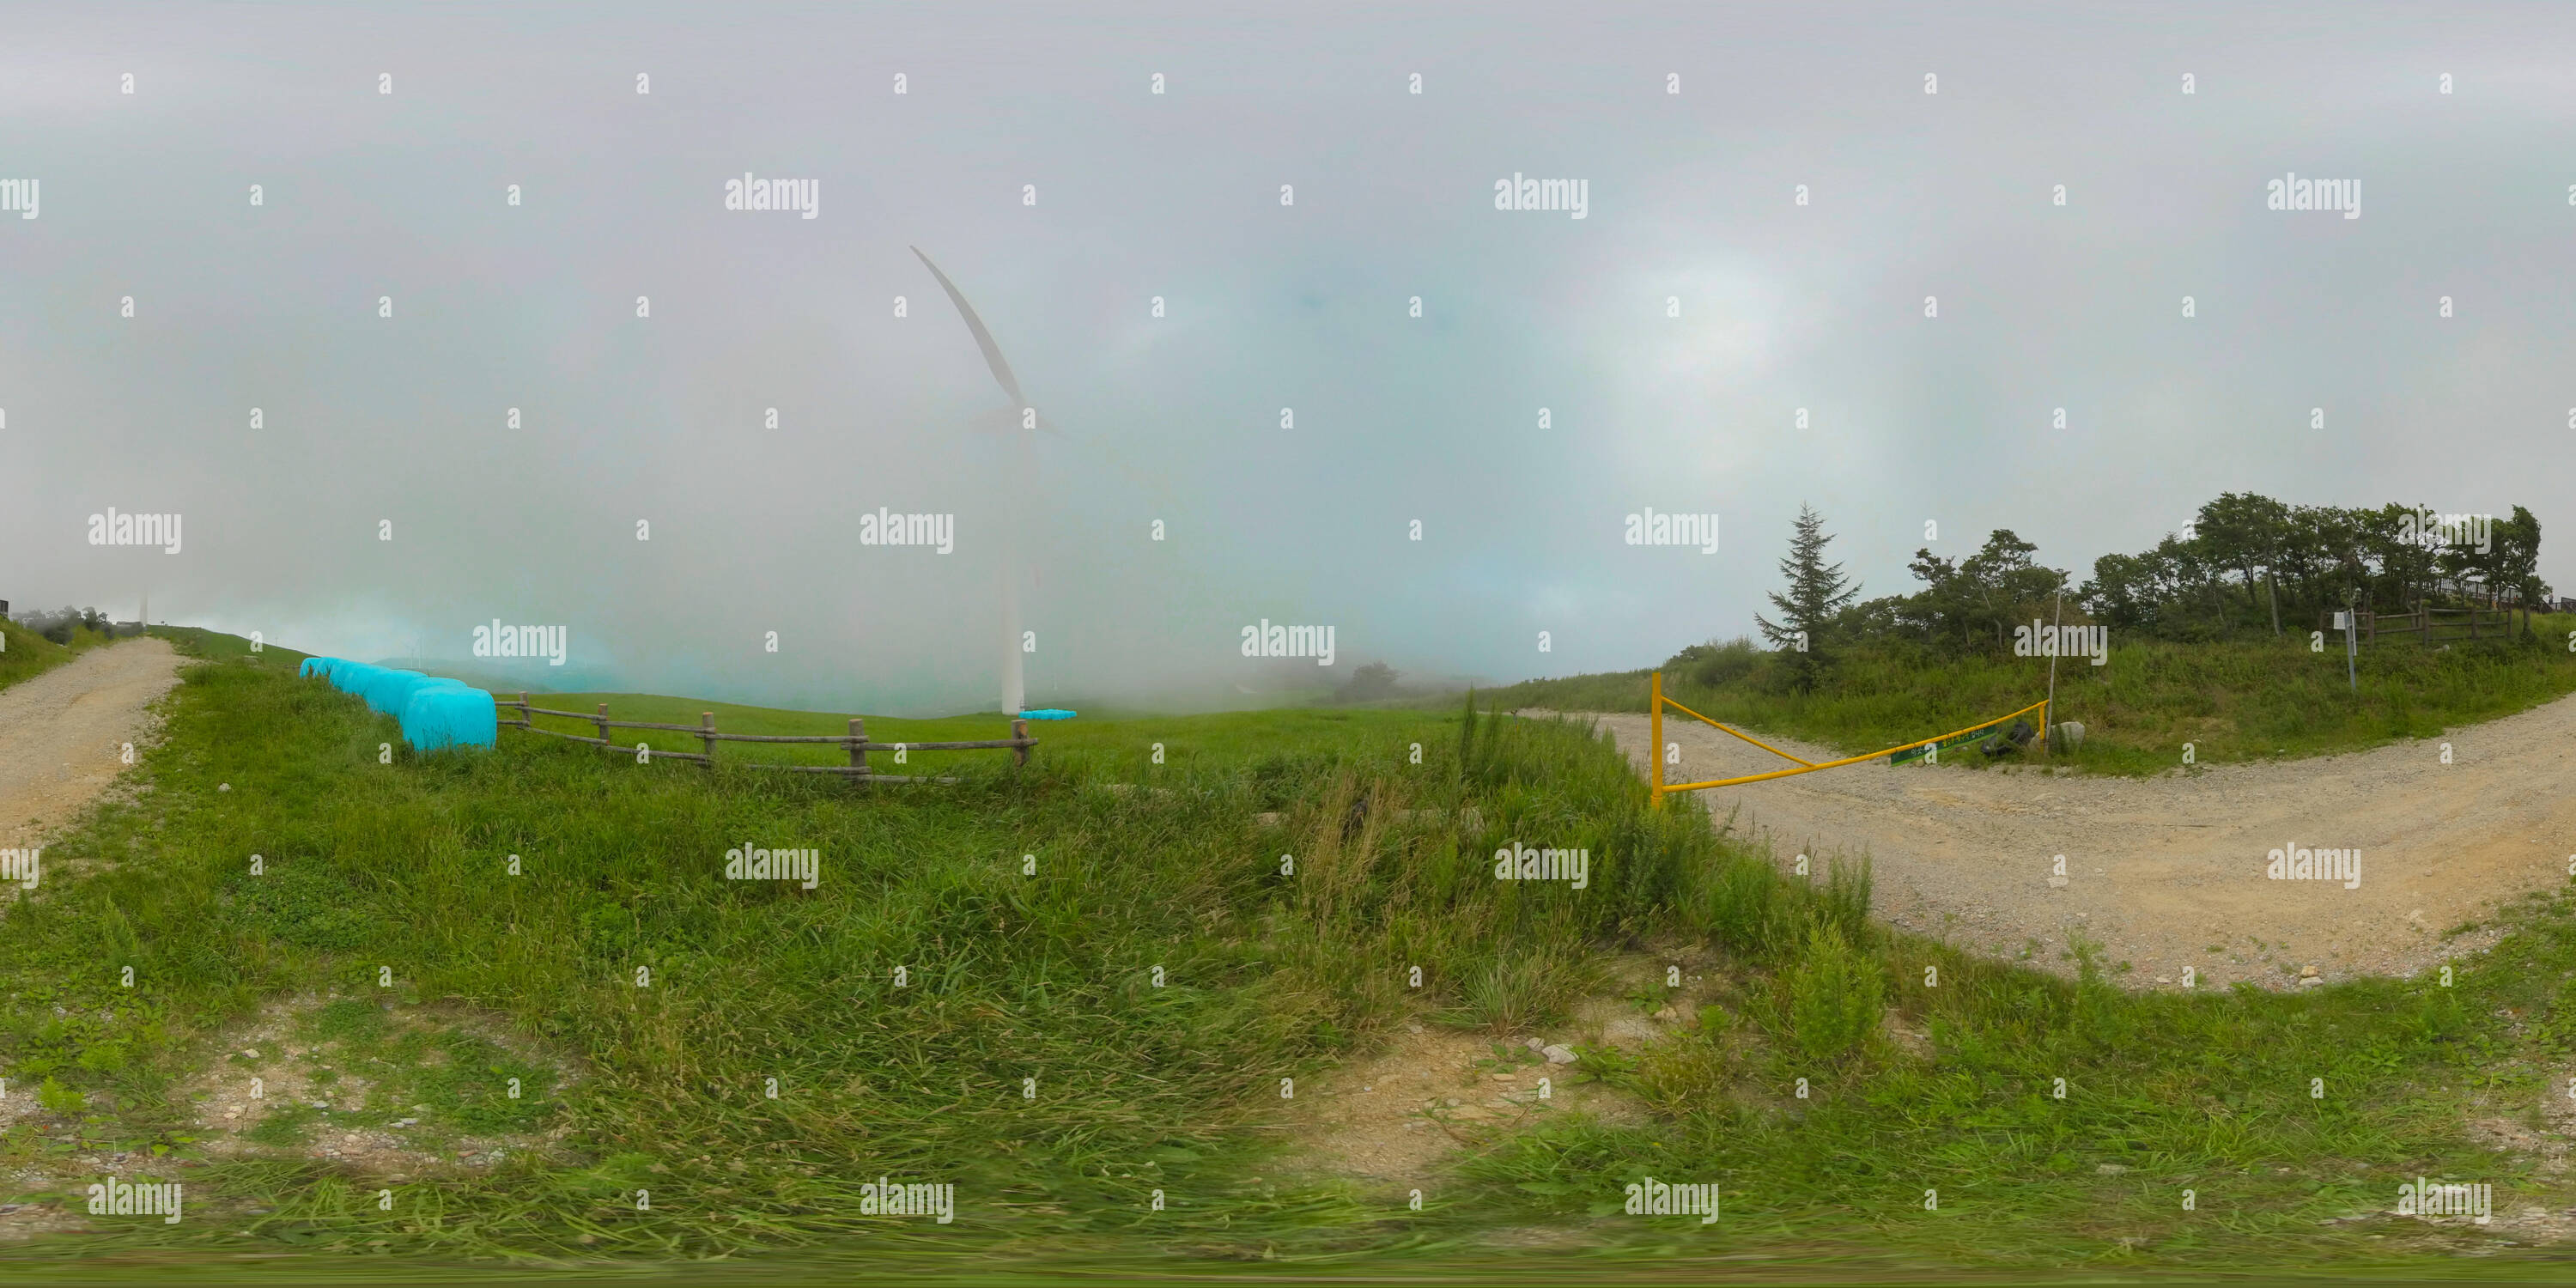 360 degree panoramic view of Daegwanryeong, South Korea 6 August 2019: 360 degrees spherical panorama of Samyang Ranch where is famous sheep farm ranch.